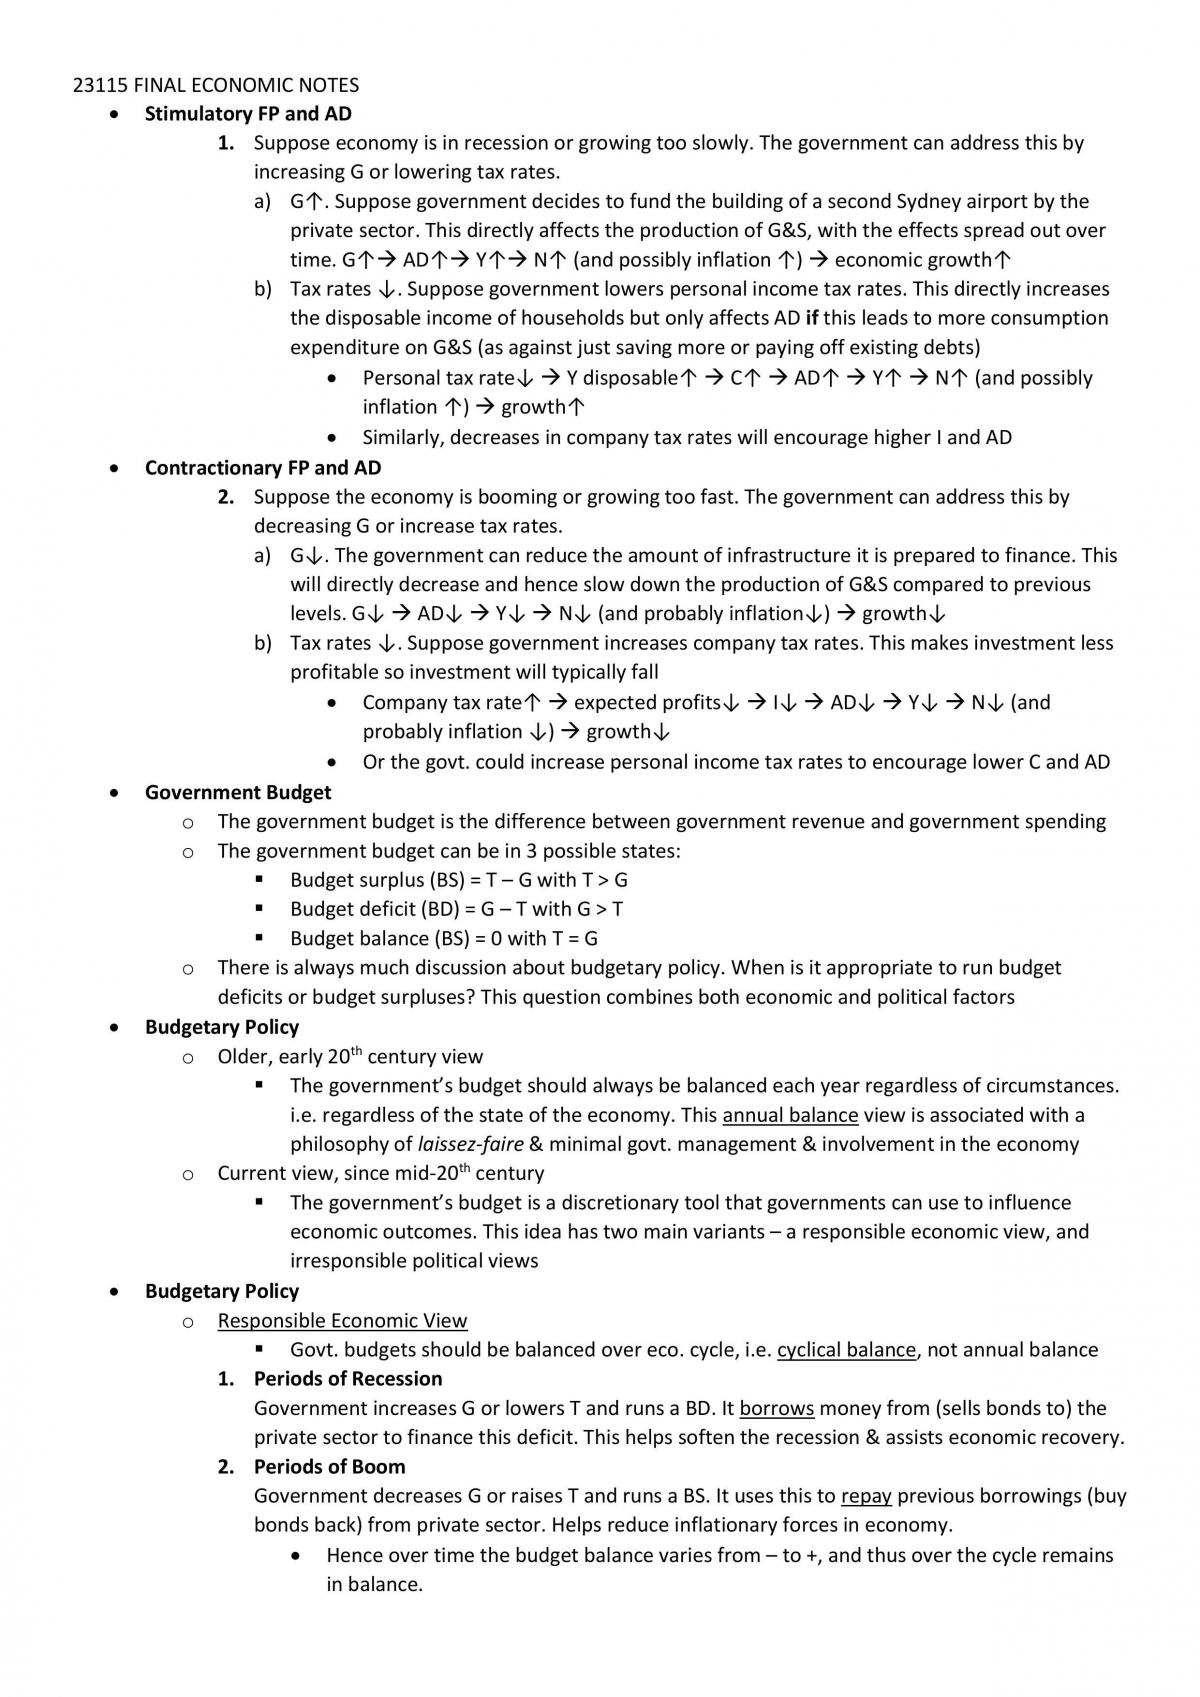 23115 Economics for Business Final Exam Notes - Page 31